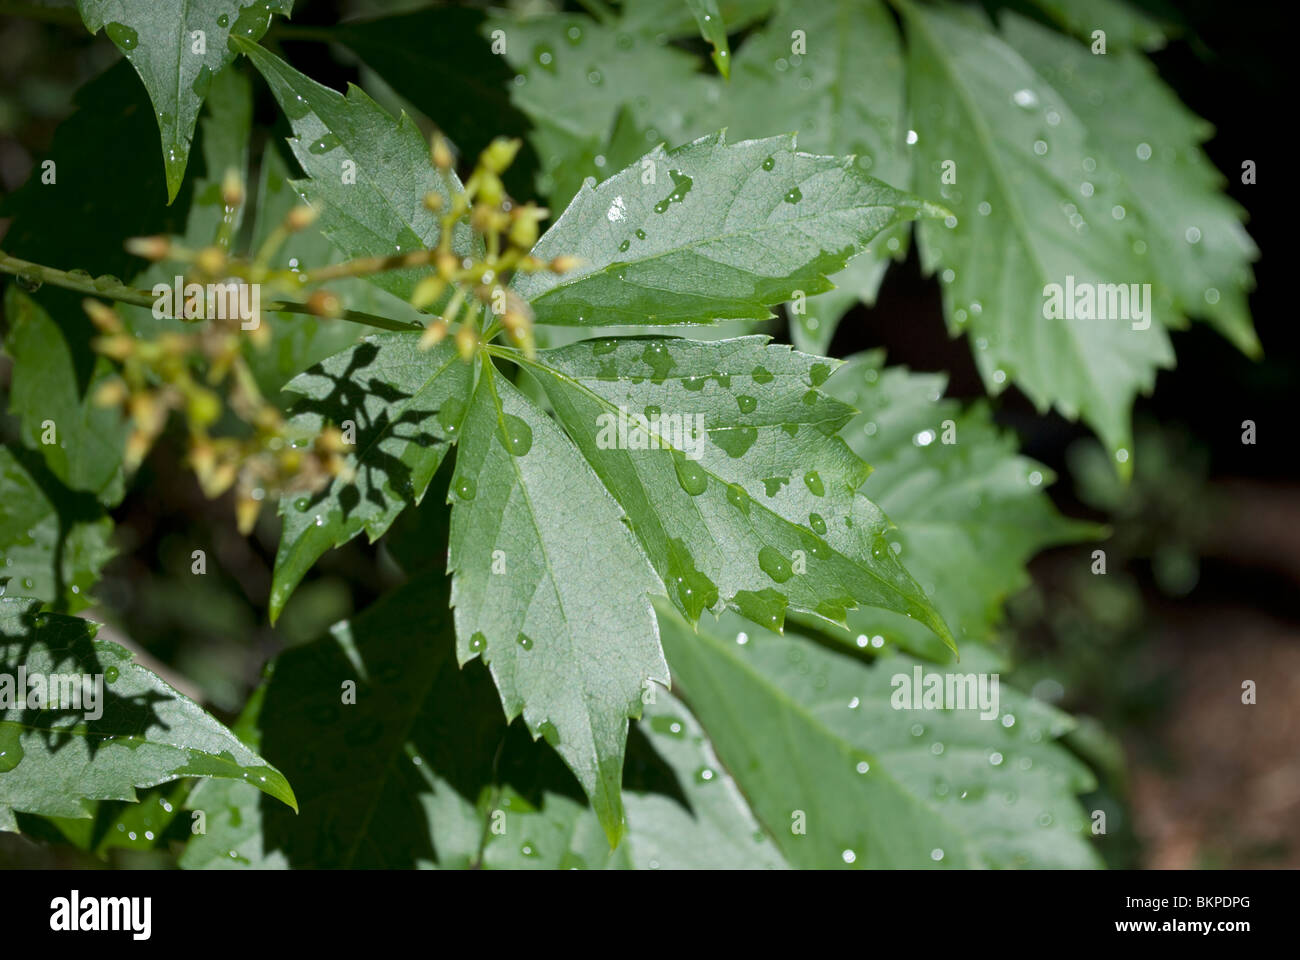 The leaves of a Box Elder native to New Mexico (Acer negundo interius) with water droplets from a recent rainstorm. Stock Photo